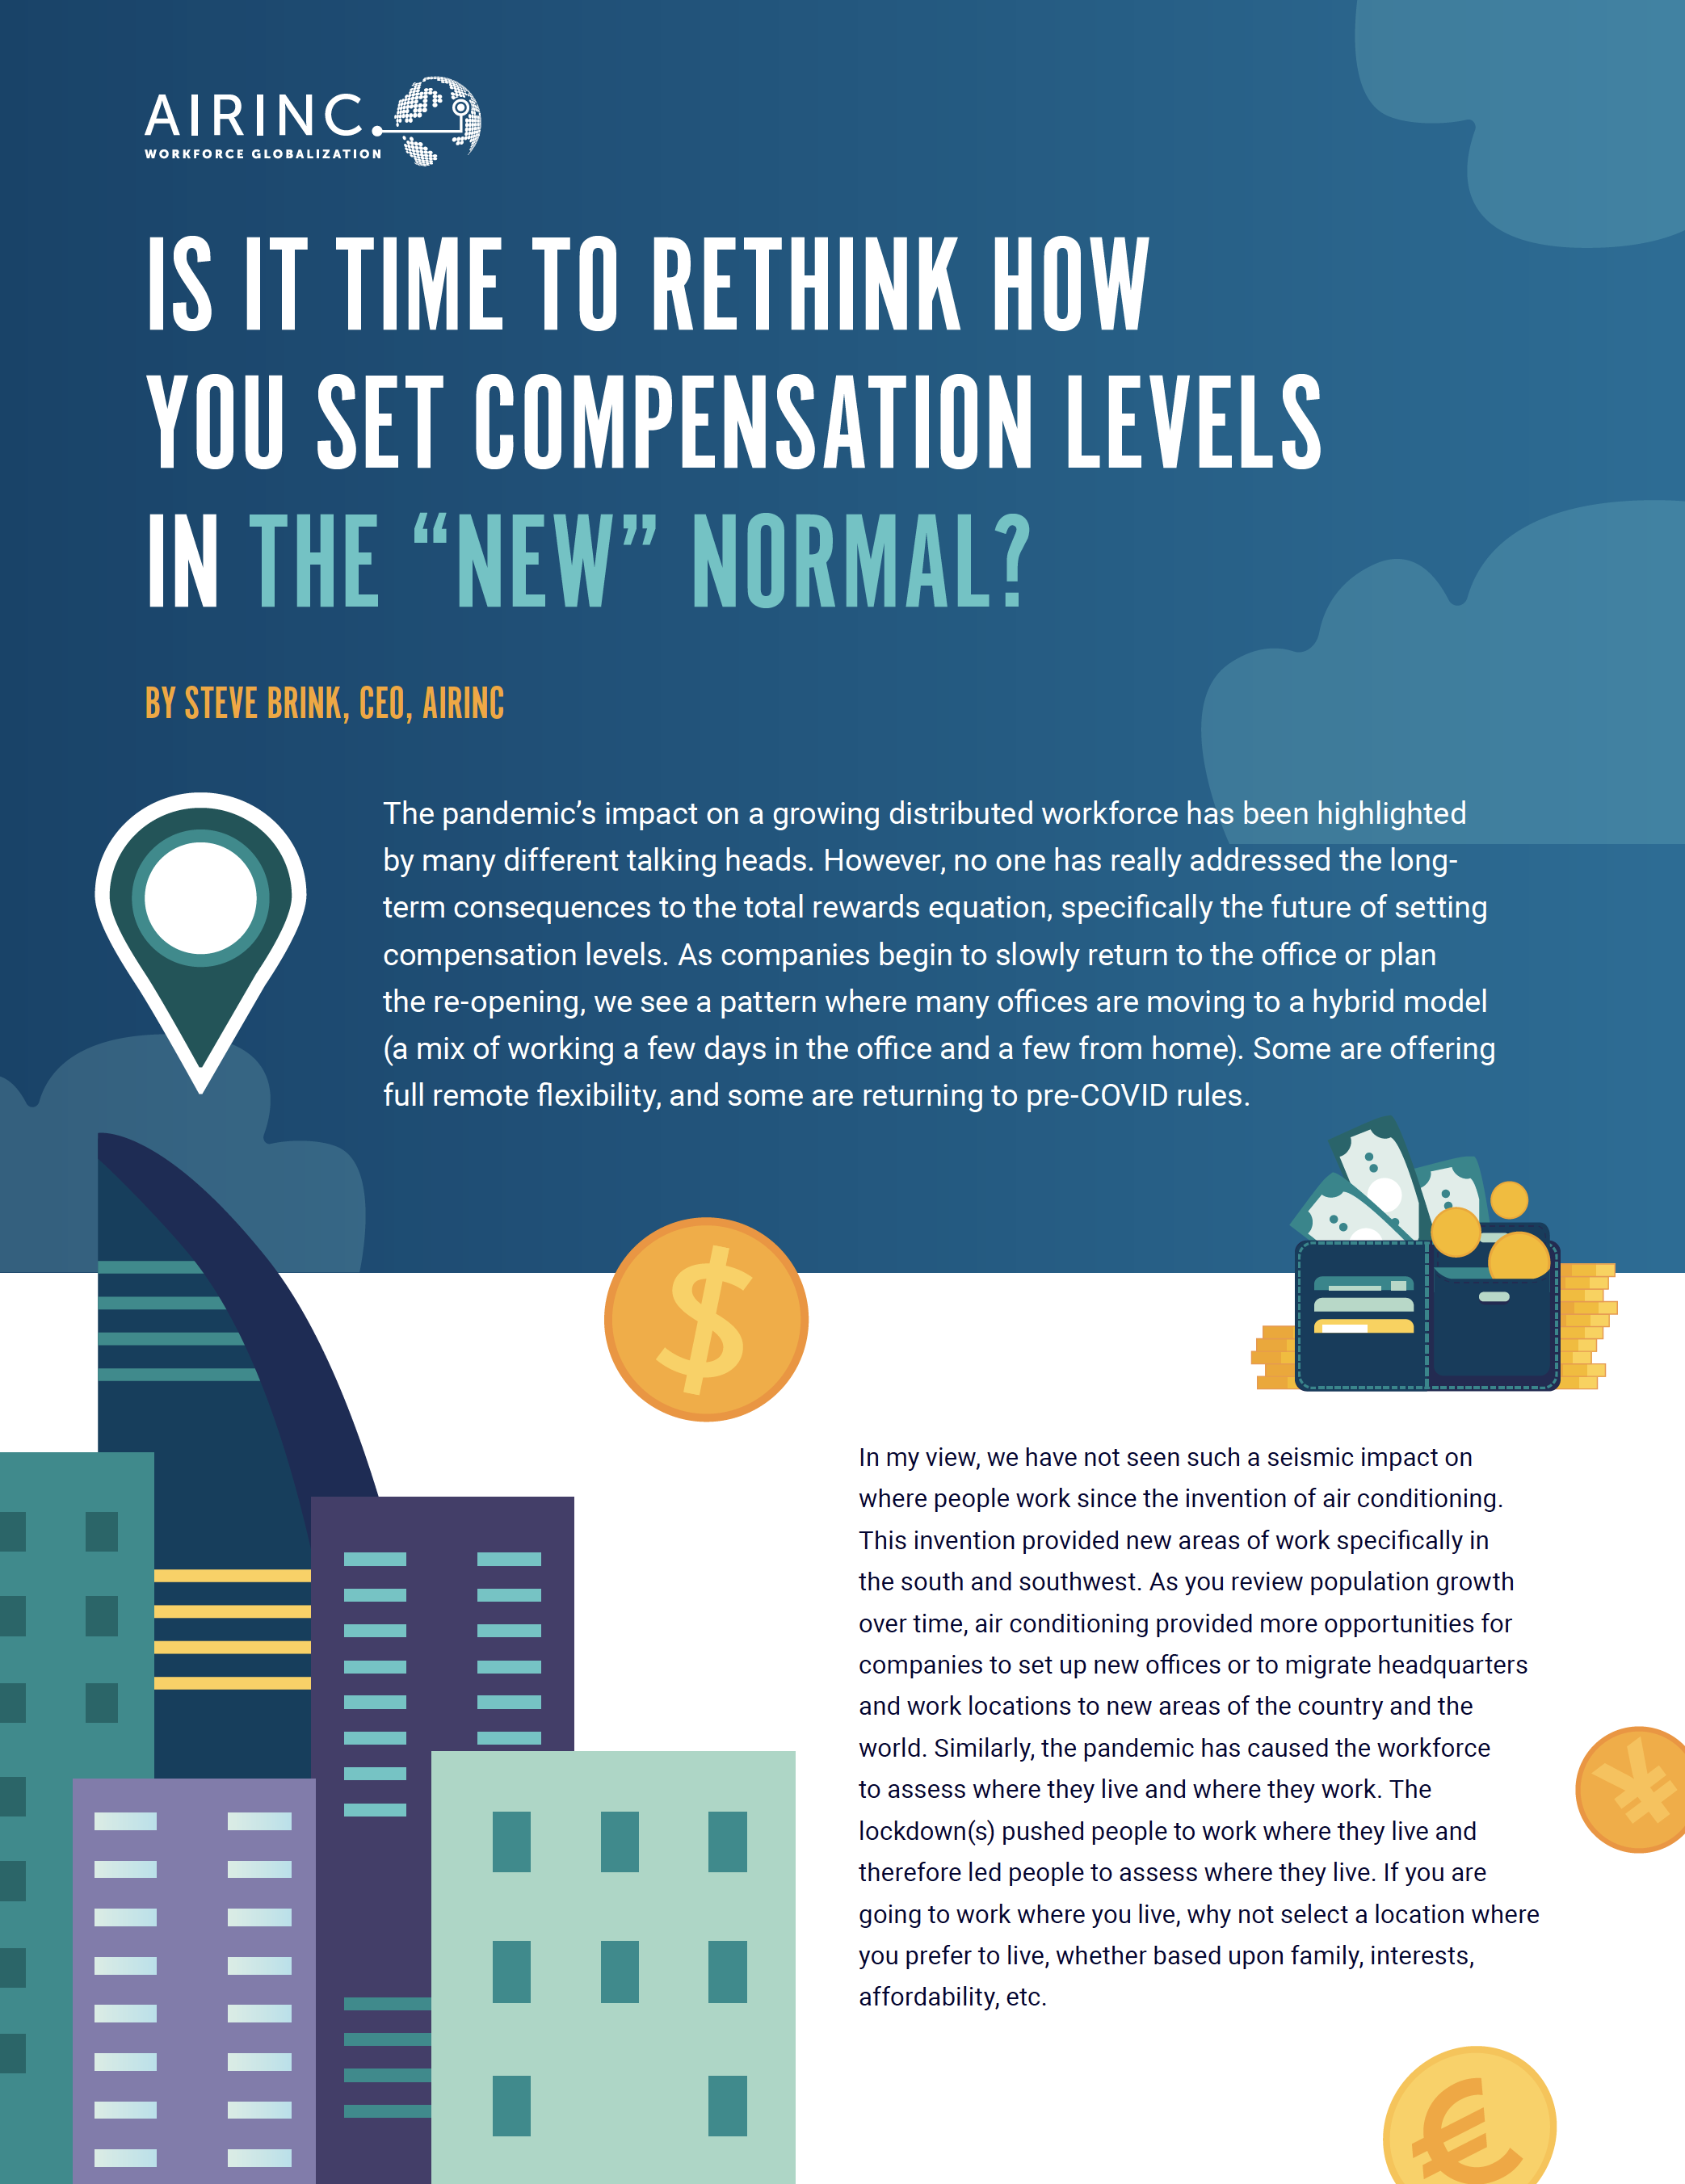 AIRINC Is It Time to Rethink How You Set Compensation Levels in The "New" Normal